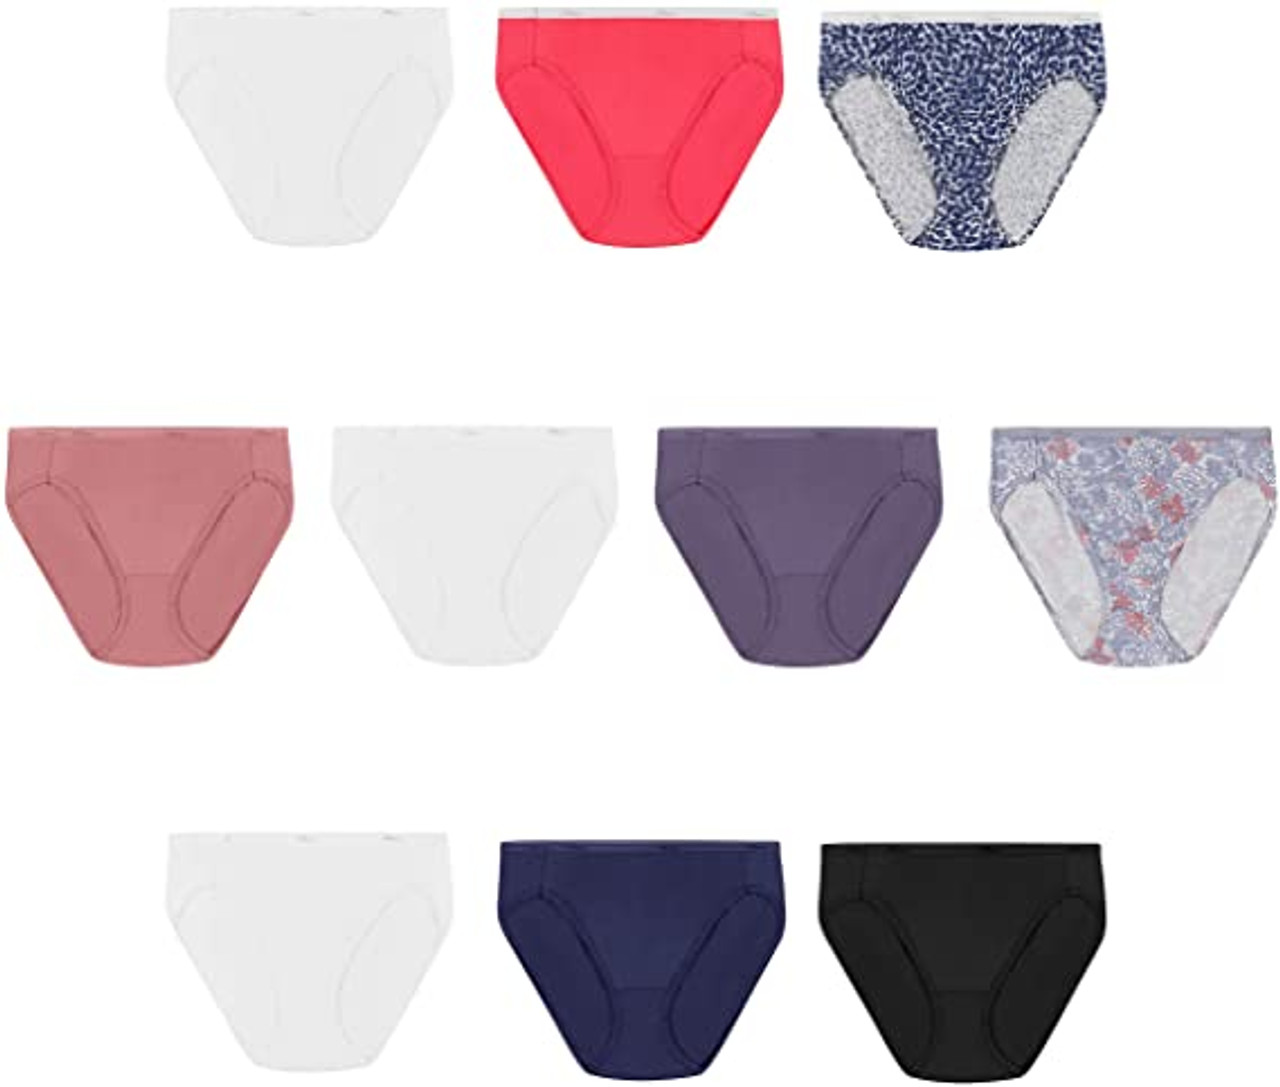 Buy Hanes Women's Cotton Hi Cut Panty, Assorted, Size 10 (Pack of 10) at